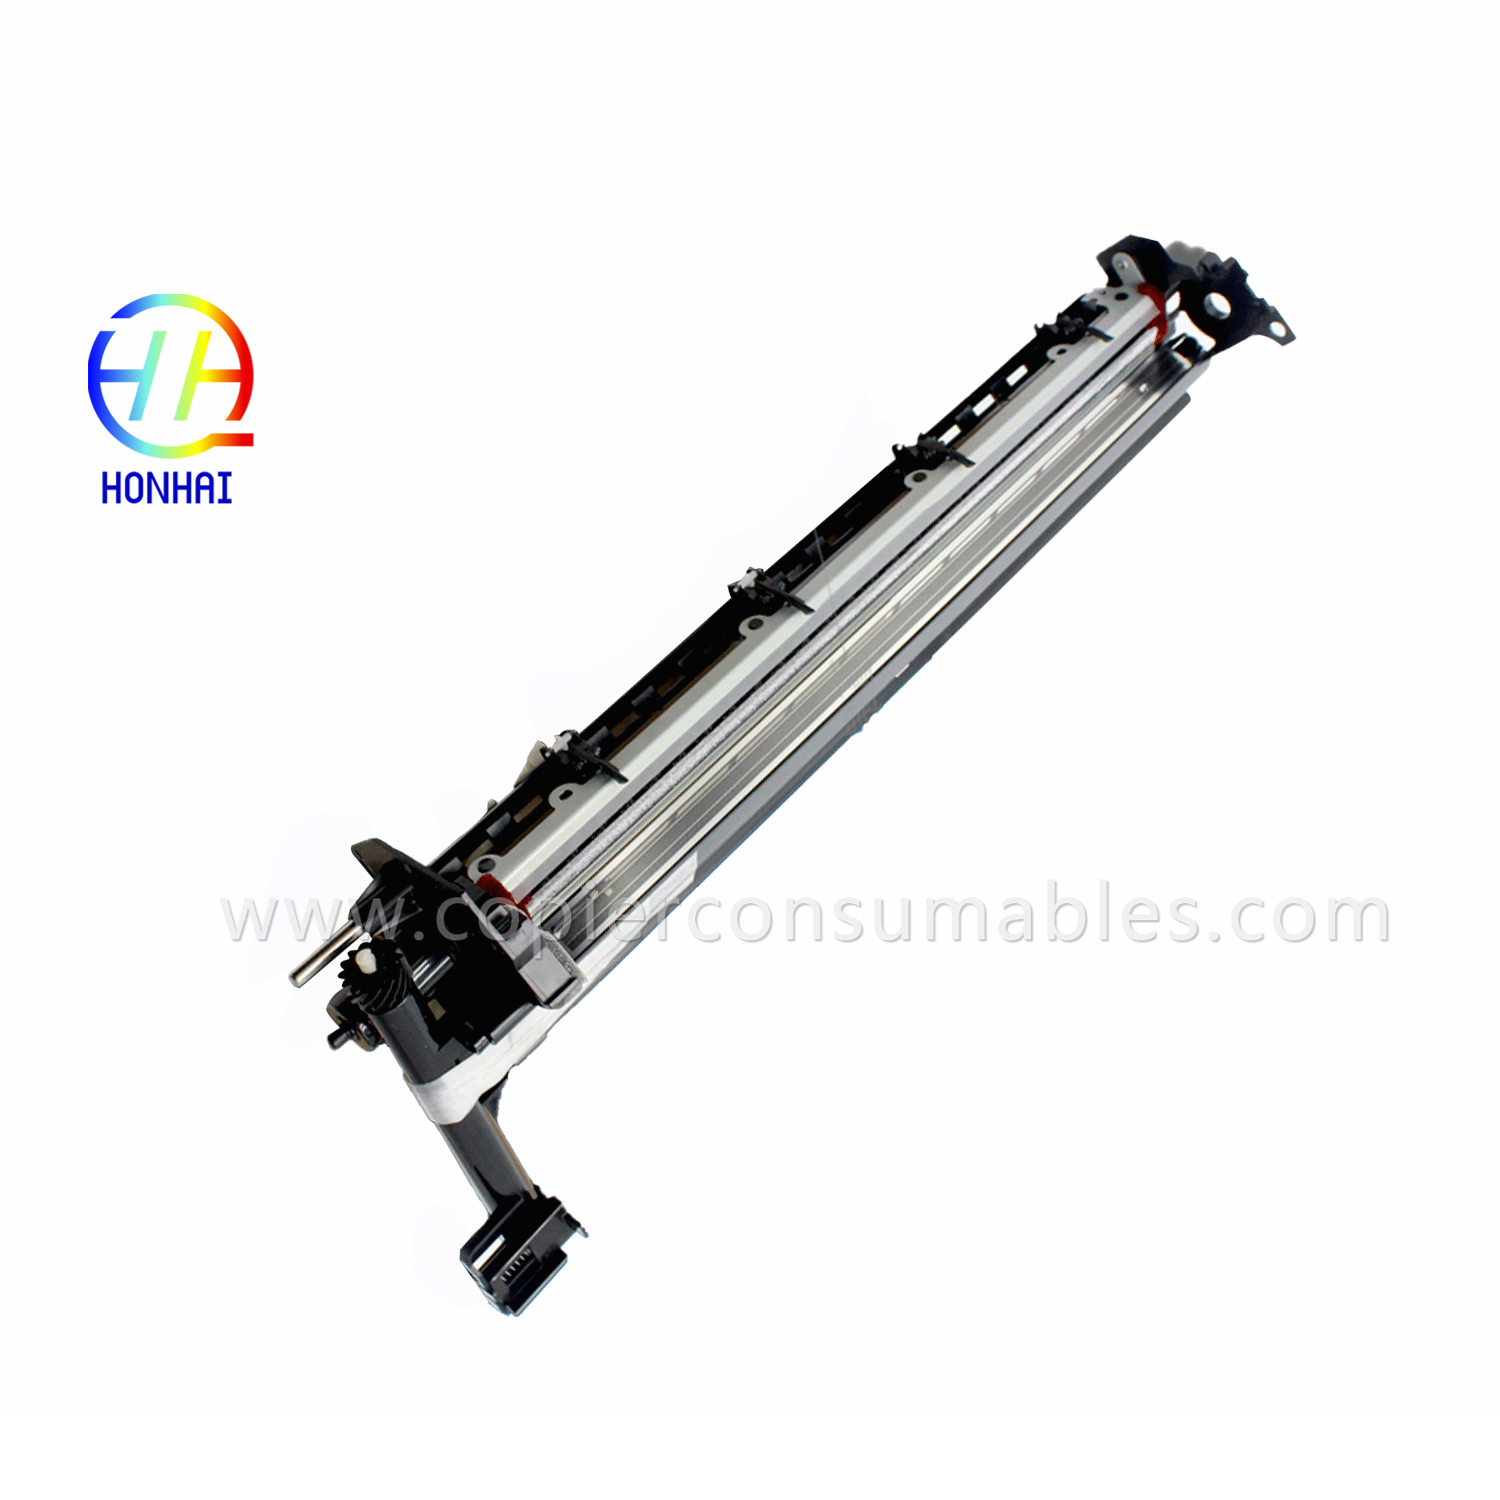 Drum Frame Assembly para sa Sharp Ar-5320 5320d Arm-160 162 205 207 (Sharp CFRM-0021RS5T CFRM-0021RS6D Toshiba 6LS11678000) OEM